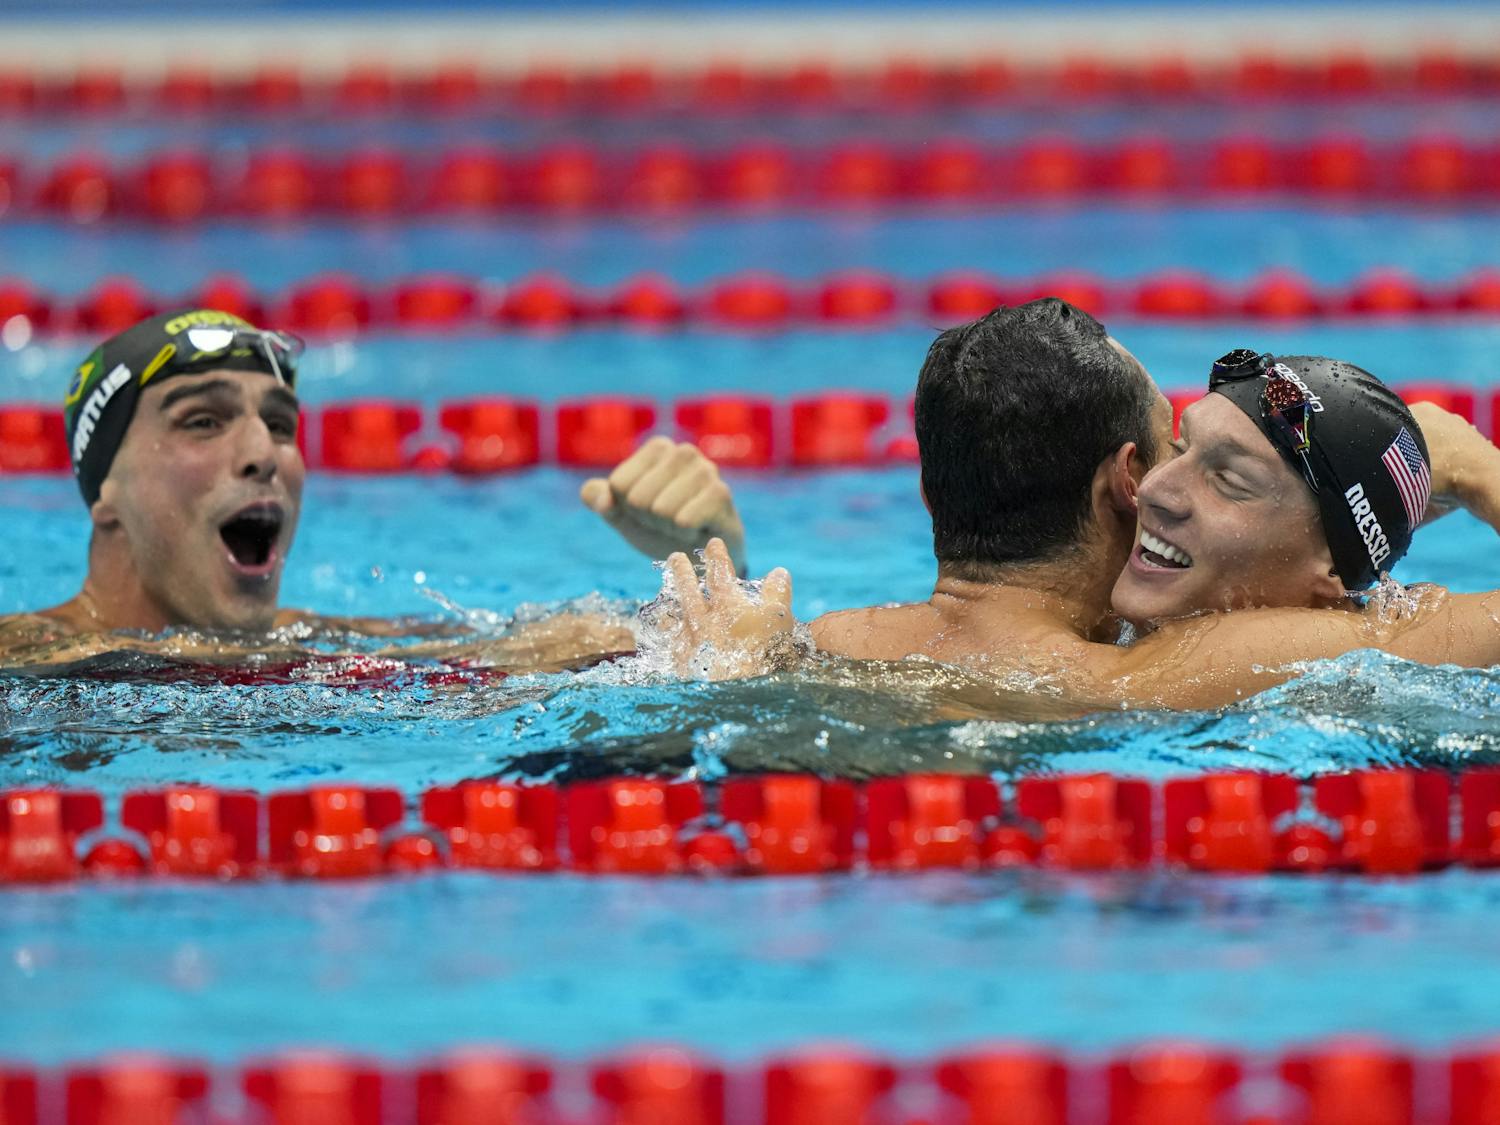 Caeleb Dressel, of United States, celebrates after winning the gold medal in a men's 50-meter freestyle fiat the 2020 Summer Olympics, Sunday, Aug. 1, 2021, in Tokyo, Japan. At left Bruno Fratus, of Brazil, celebrates winning the bronze medal. (AP Photo/David Goldman)